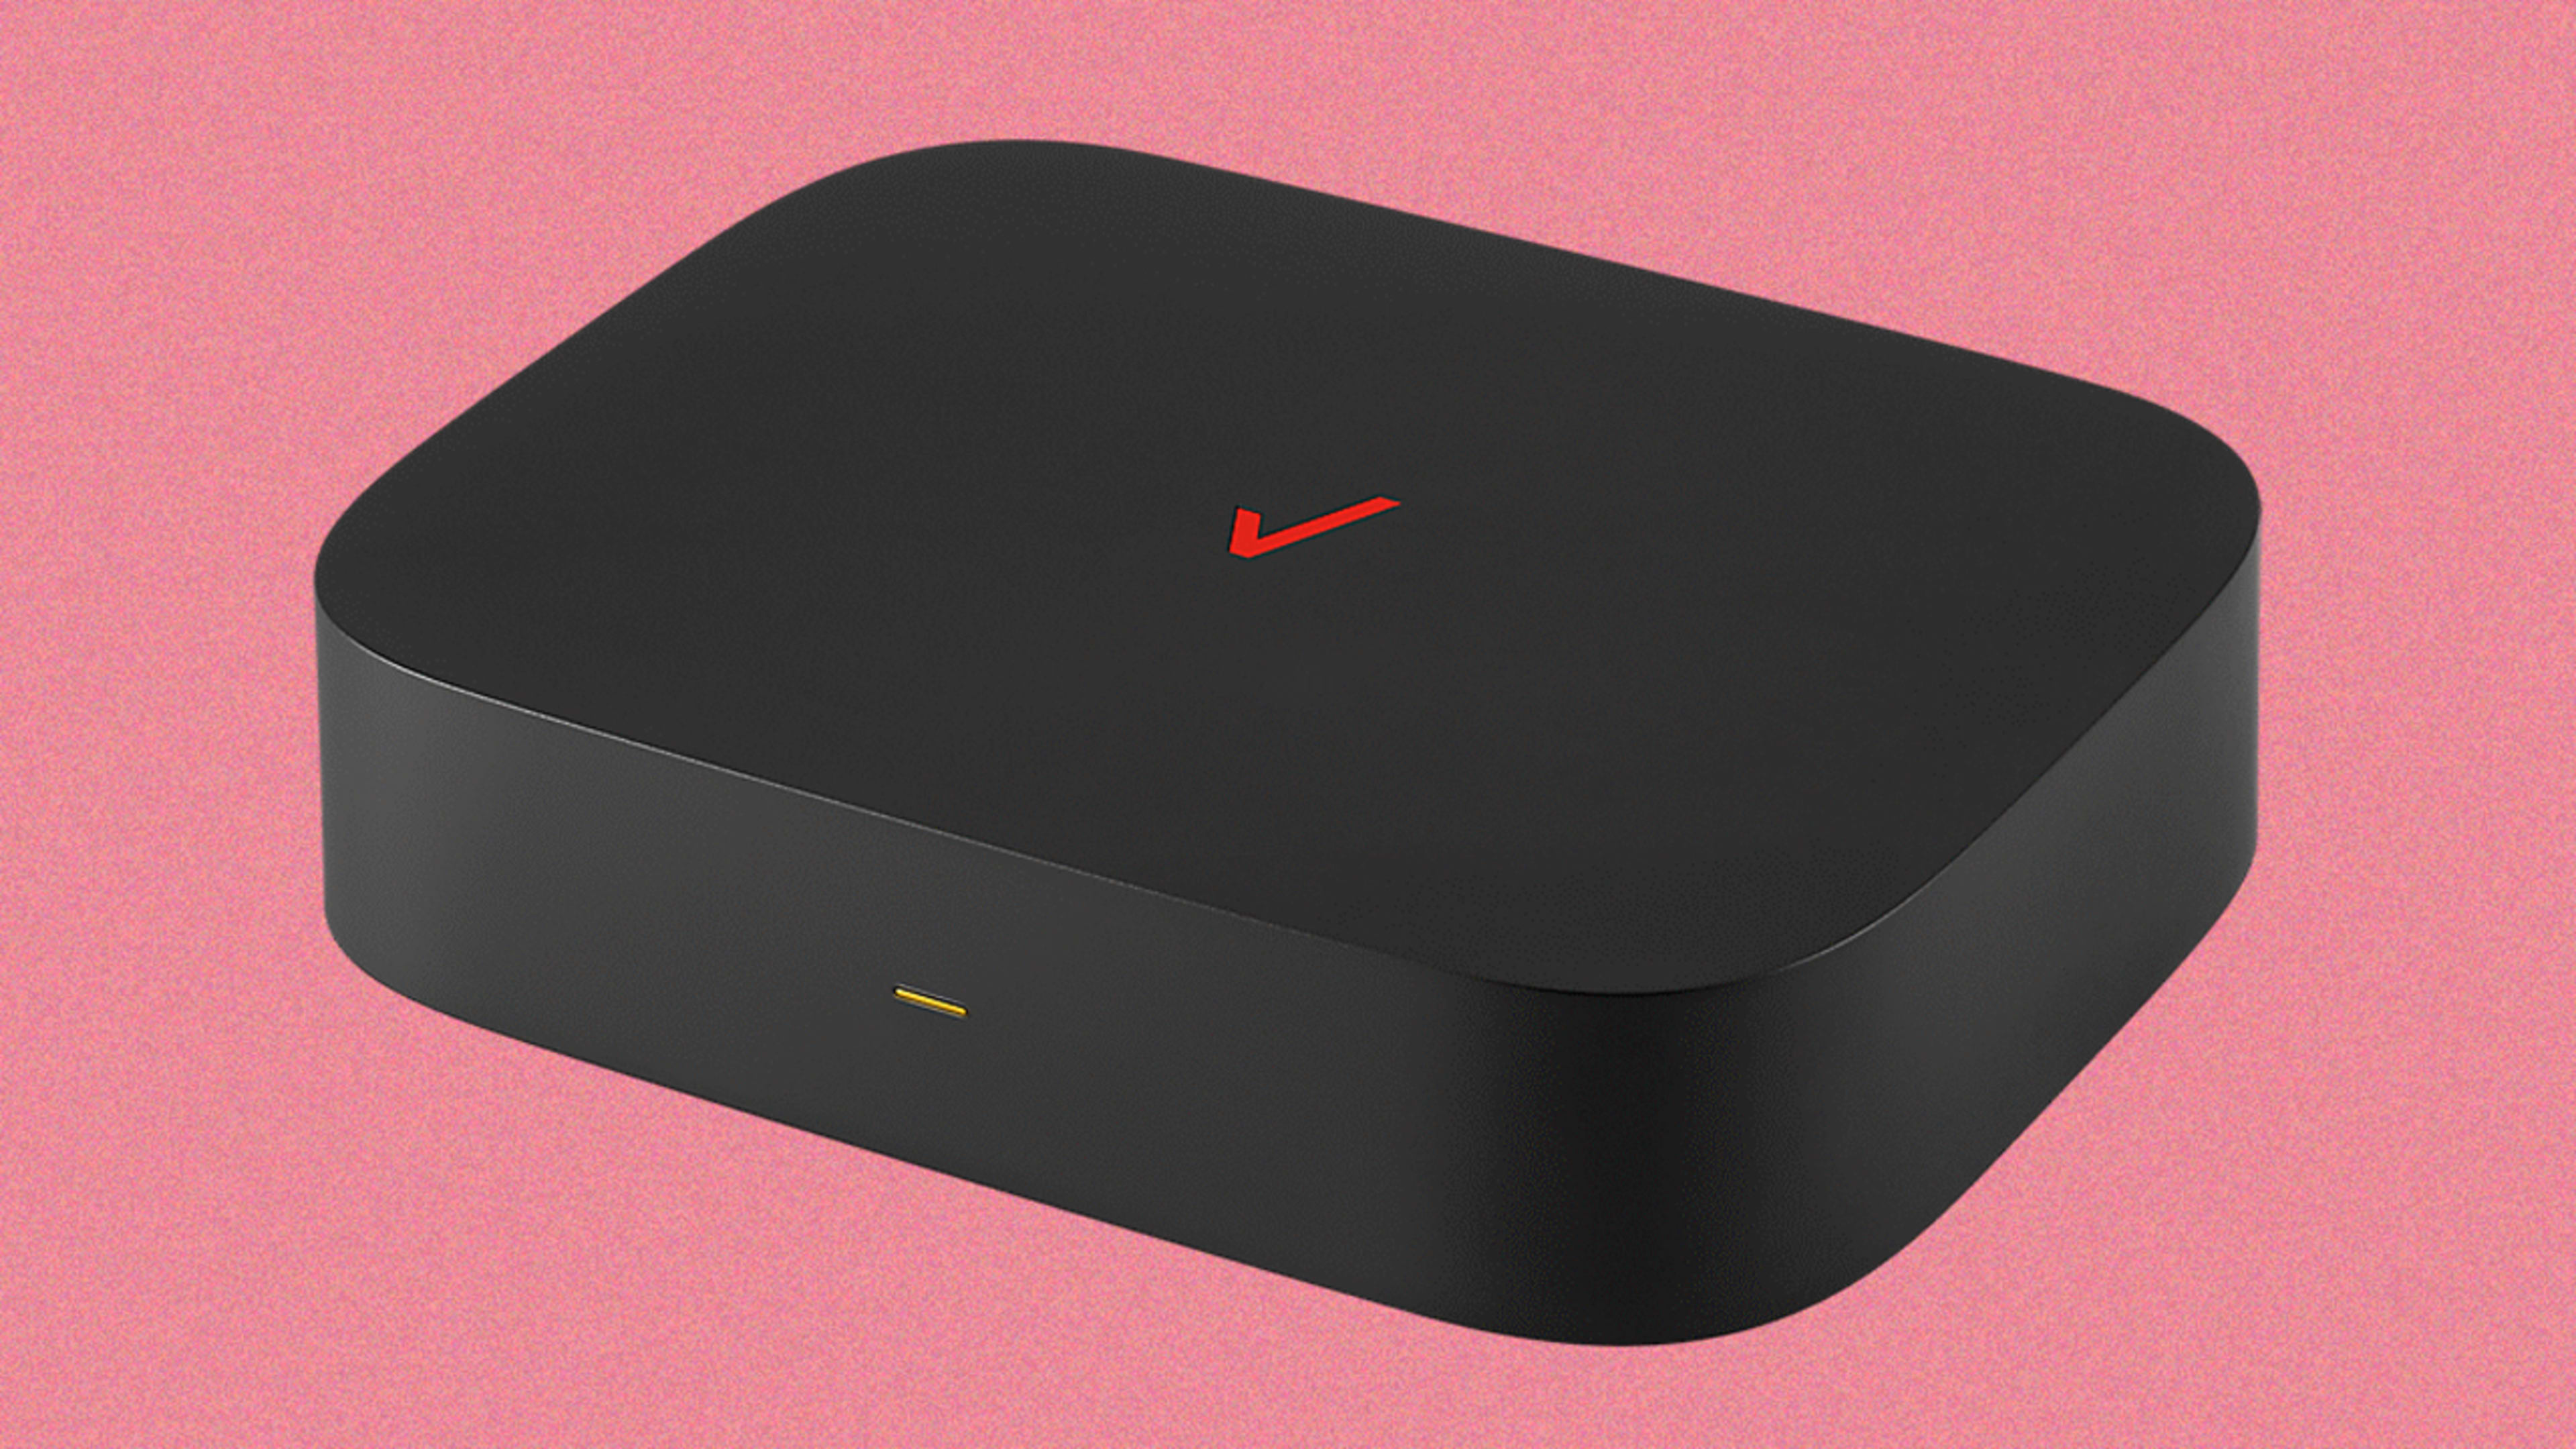 Verizon’s new TV streaming box has a bizarre omission: a little streaming platform called Netflix